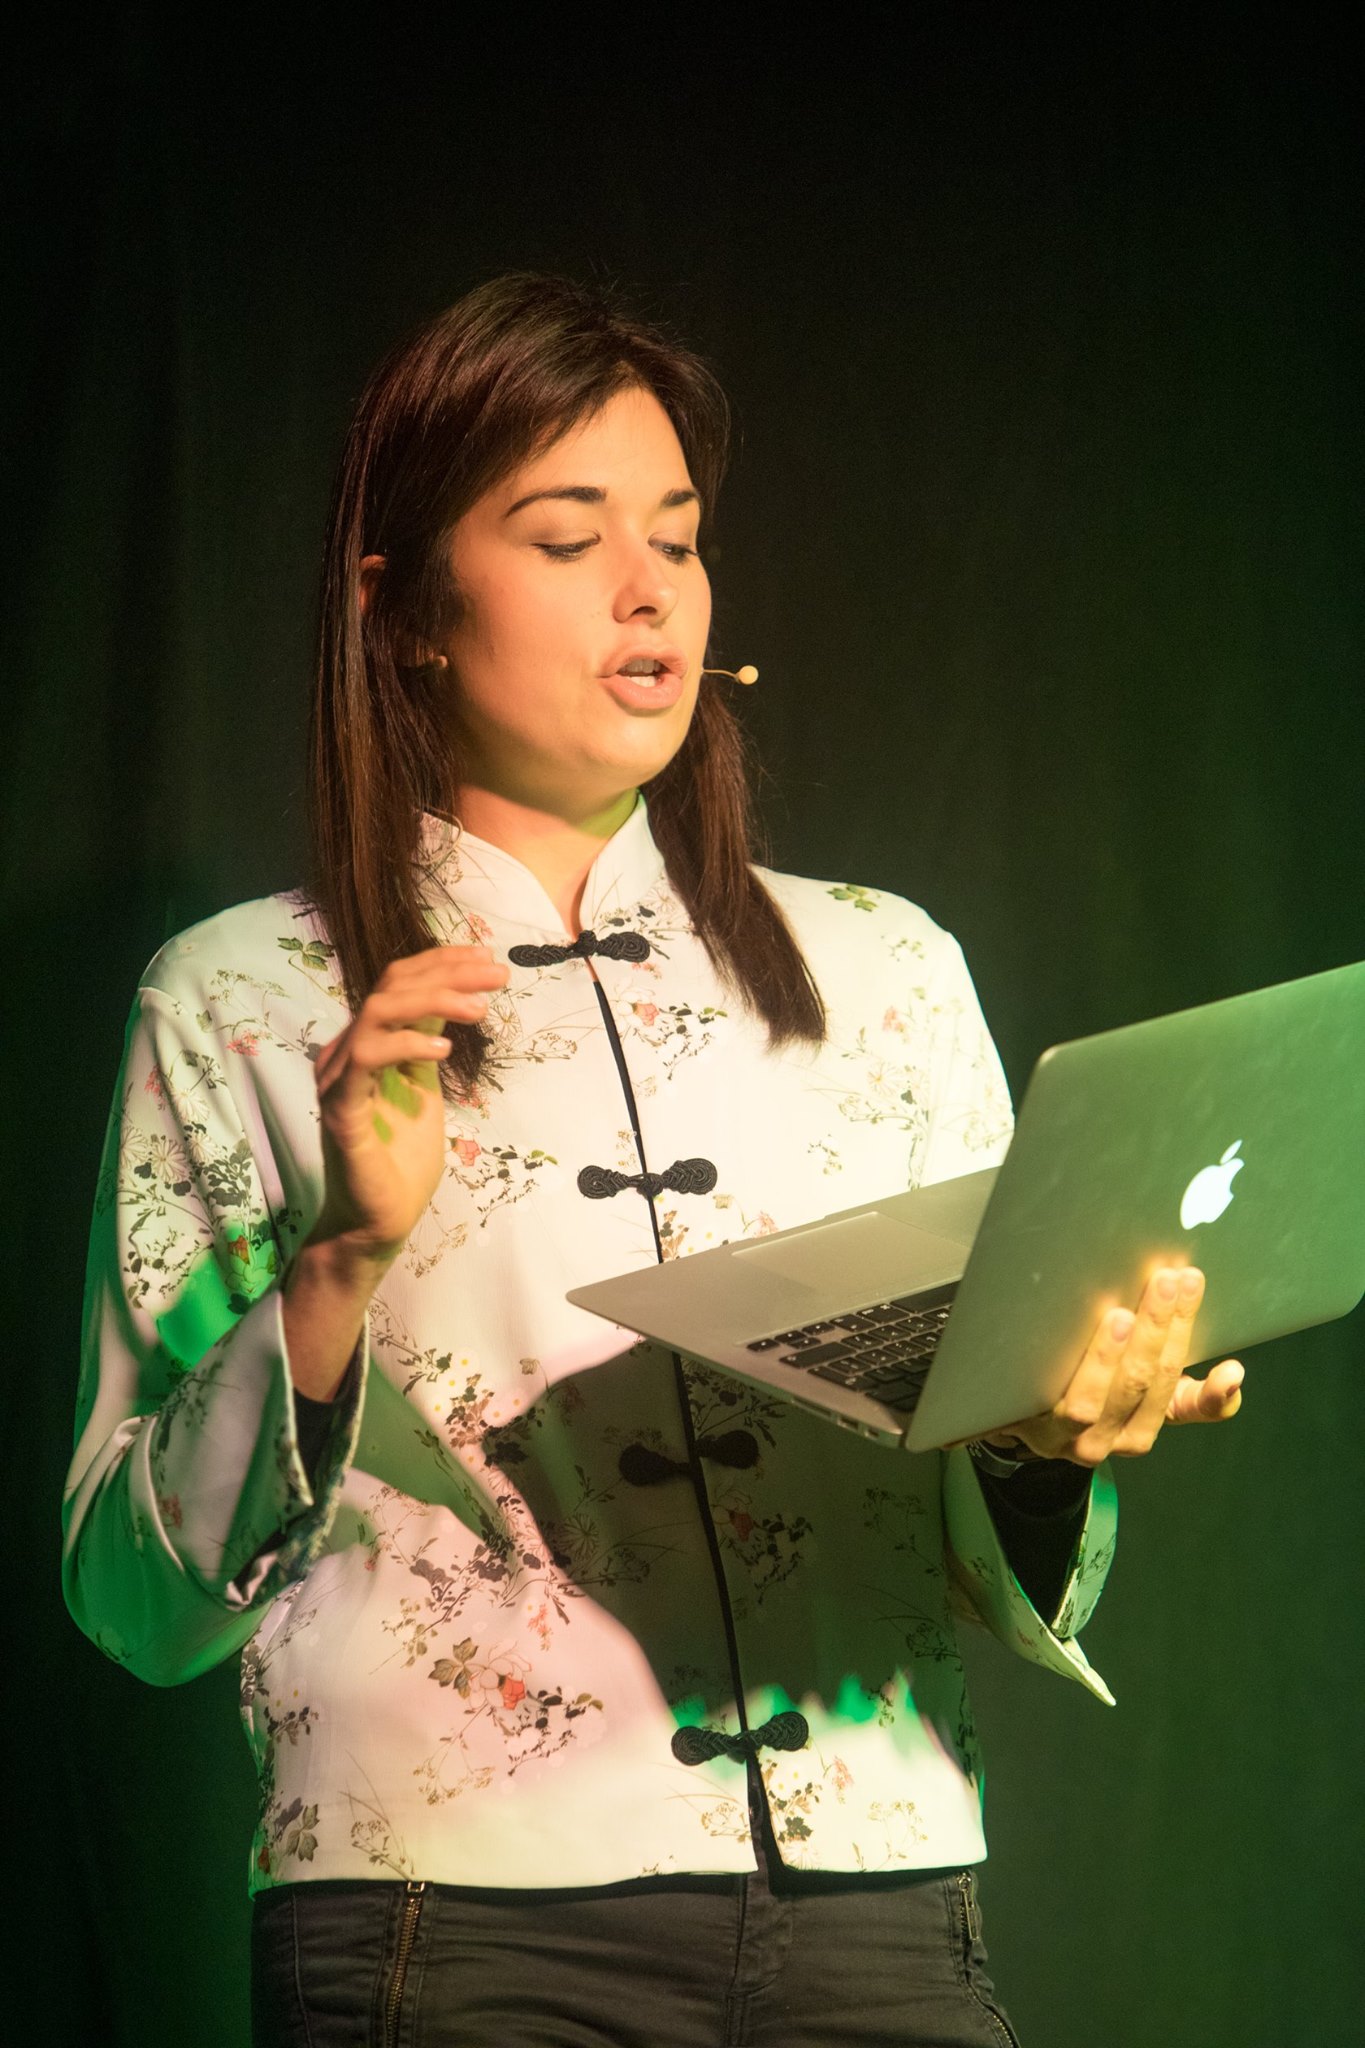 Stefanie Preissner reads from laptop at YABF 2017